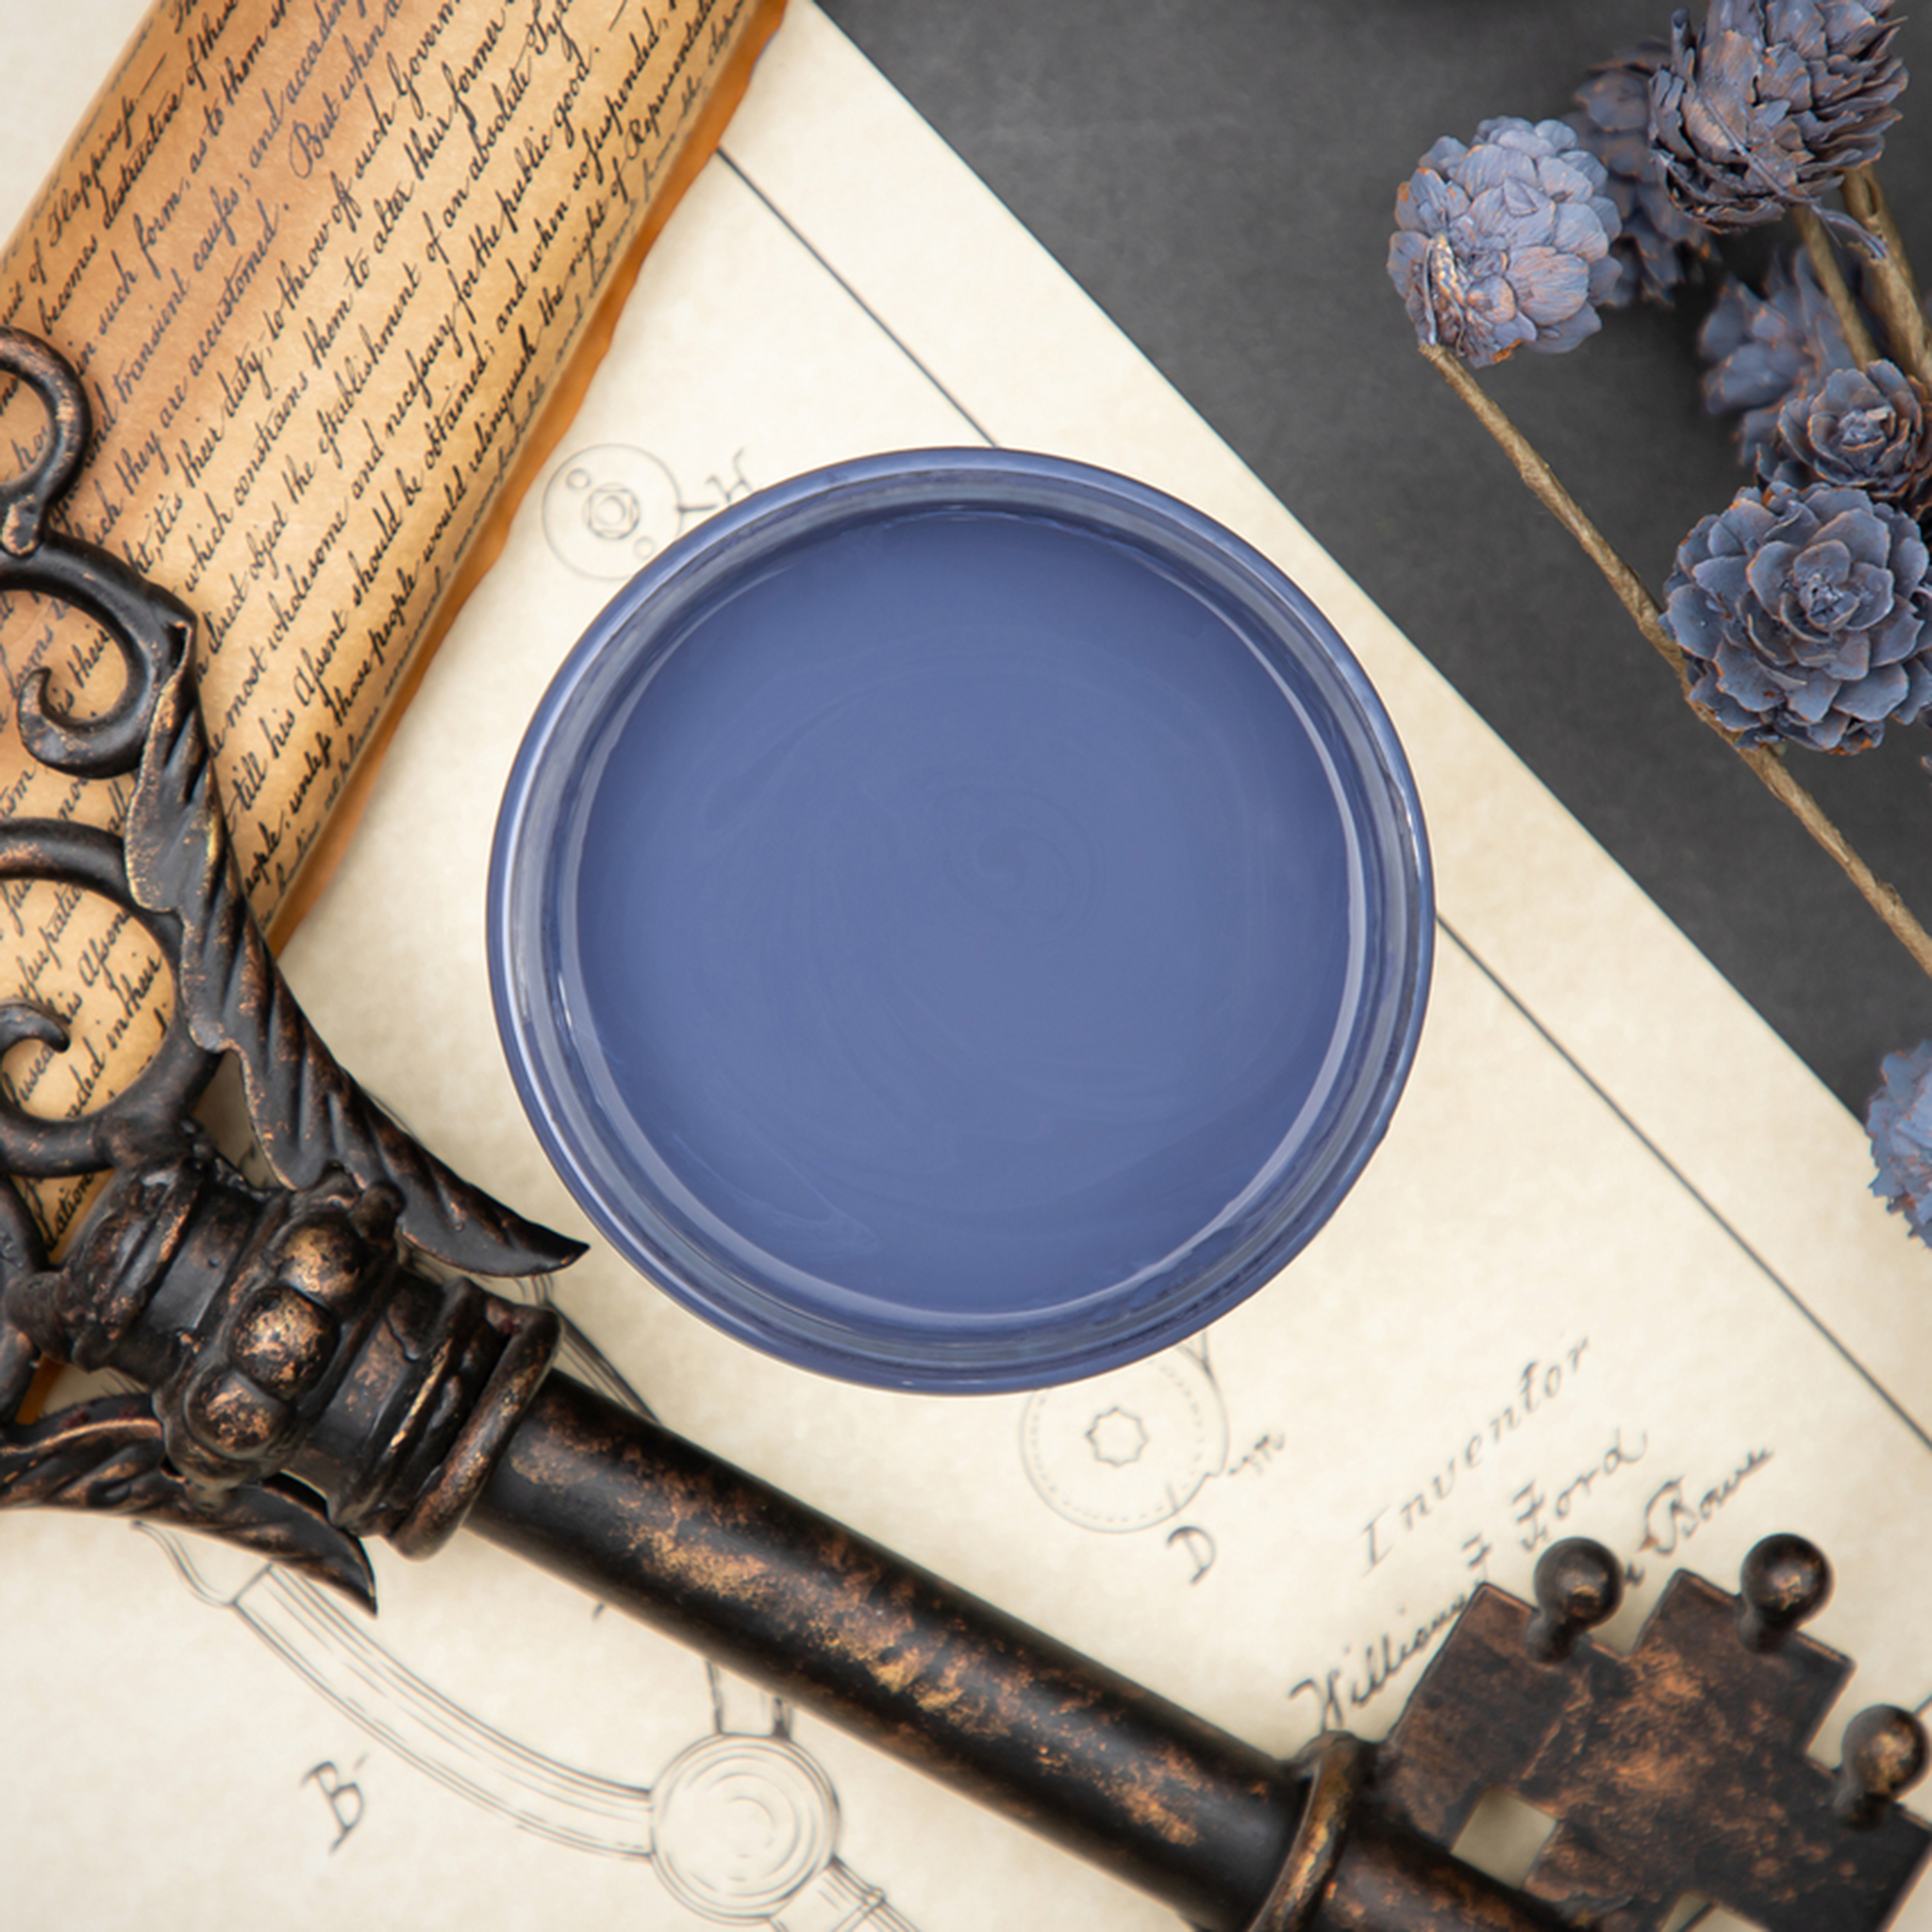 An arial view of an open container of Dixie Belle Paint Company’s Yankee Blue Chalk Mineral Paint is surrounded by a vintage key and blue-painted pine cones.